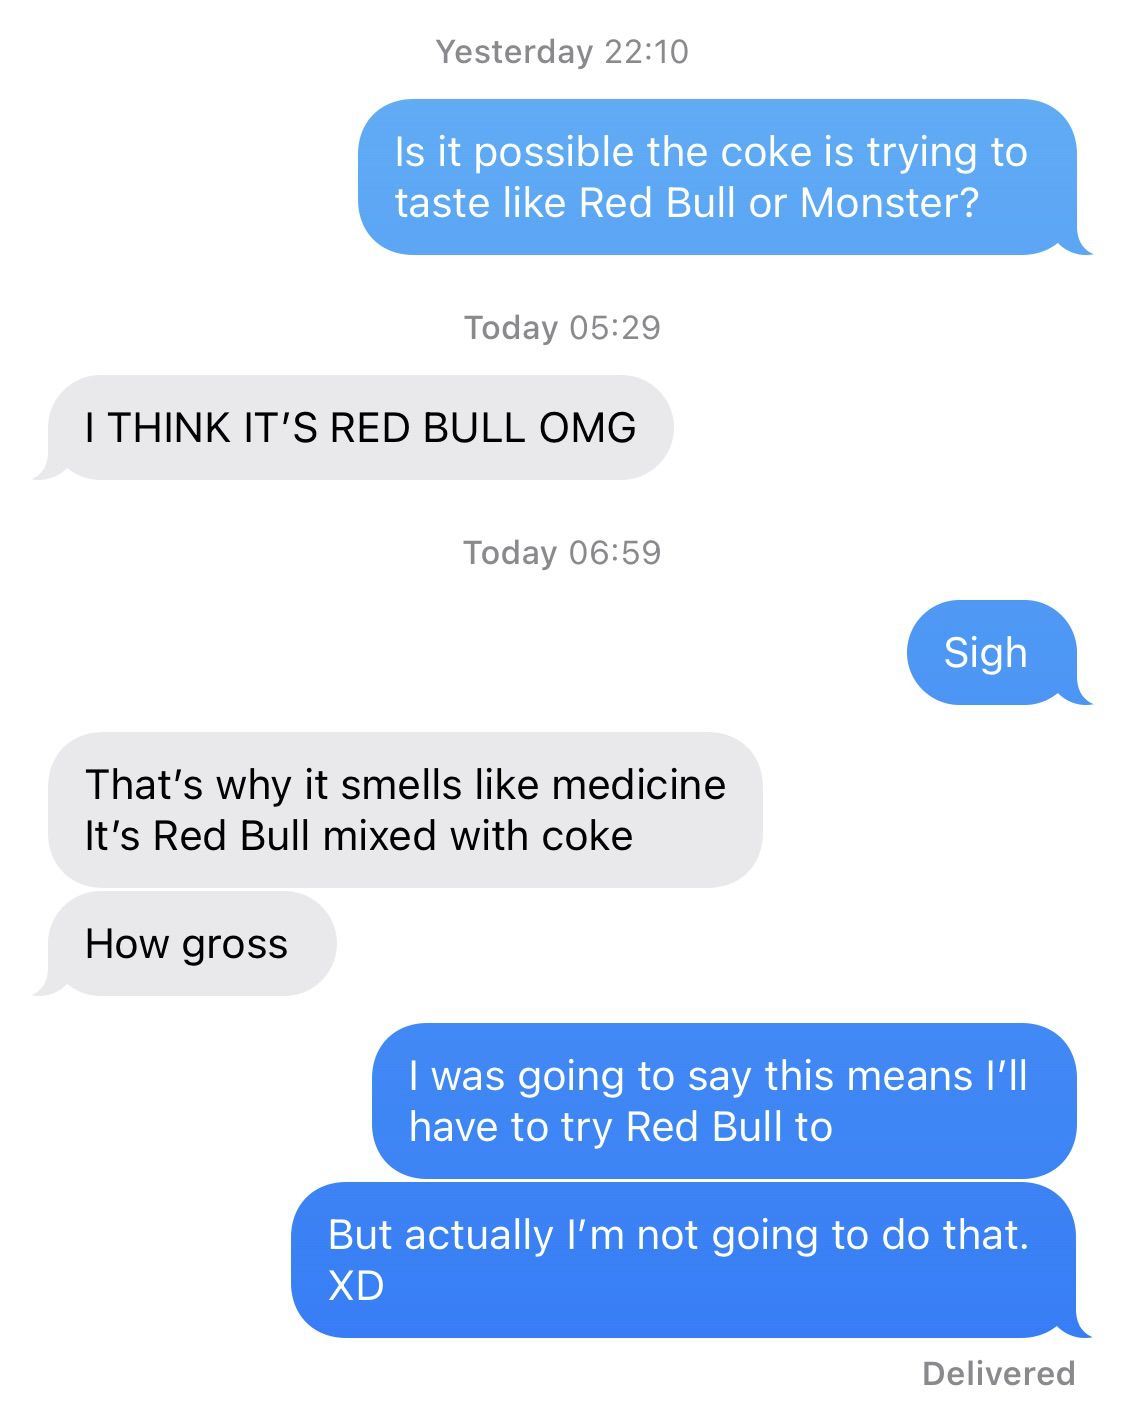  “Is it imaginable  the coke is trying to sensation  similar  Red Bull oregon  Monster?” “I deliberation  it’s Red Bull OMG.” “Sigh” “That’s wherefore  it smells similar  medicine. It’s Red Bull mixed with coke. How gross.” “I was going to accidental    this means I’ll person  to effort   Red Bull too. But really  I’m not going to bash  that.”